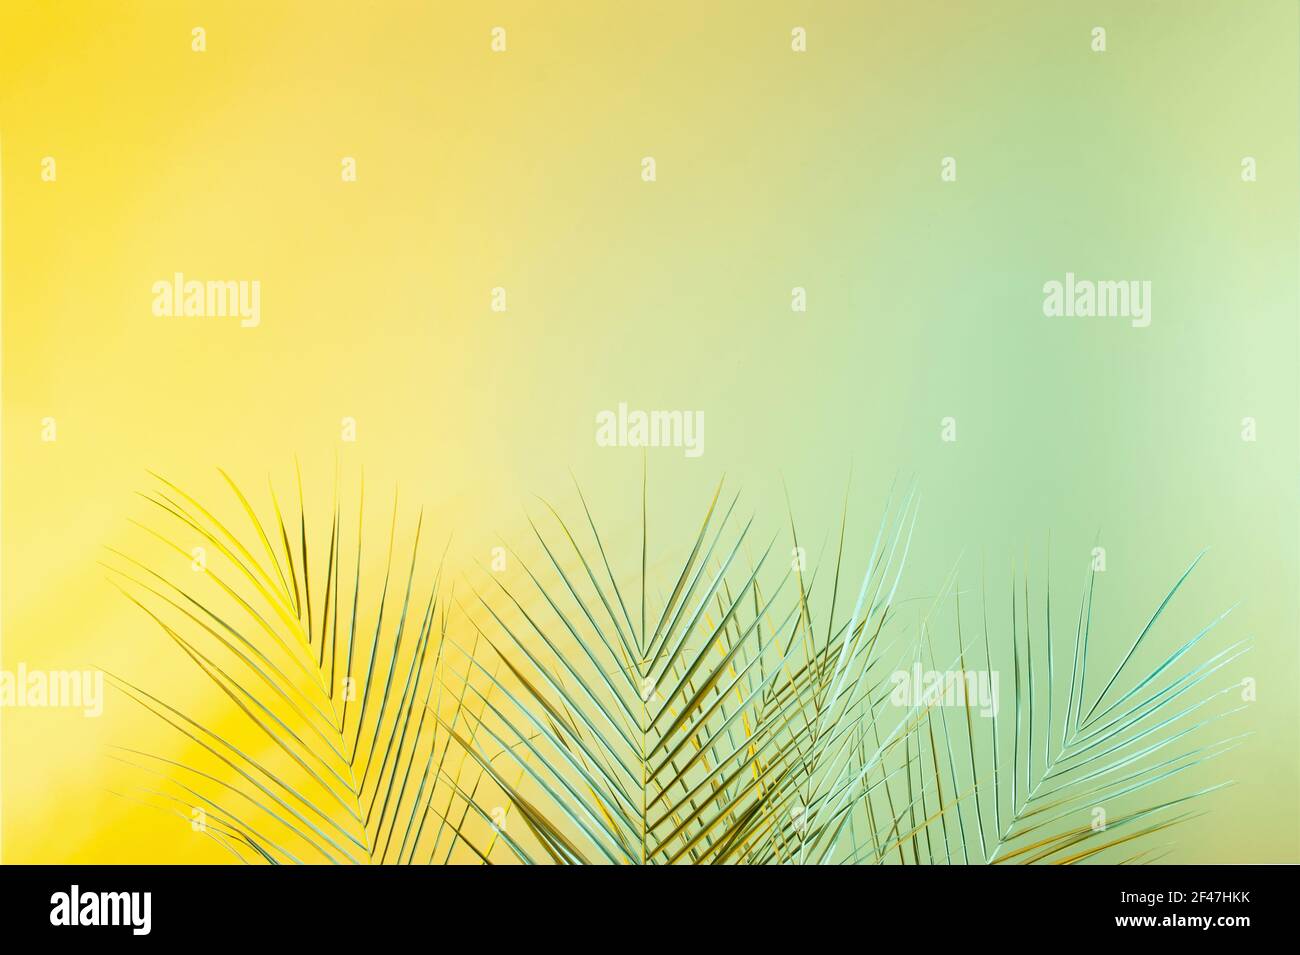 Creative yellow green color layout made of tropical leaves. Minimal green palm leafs background. Nature concept. Stock Photo